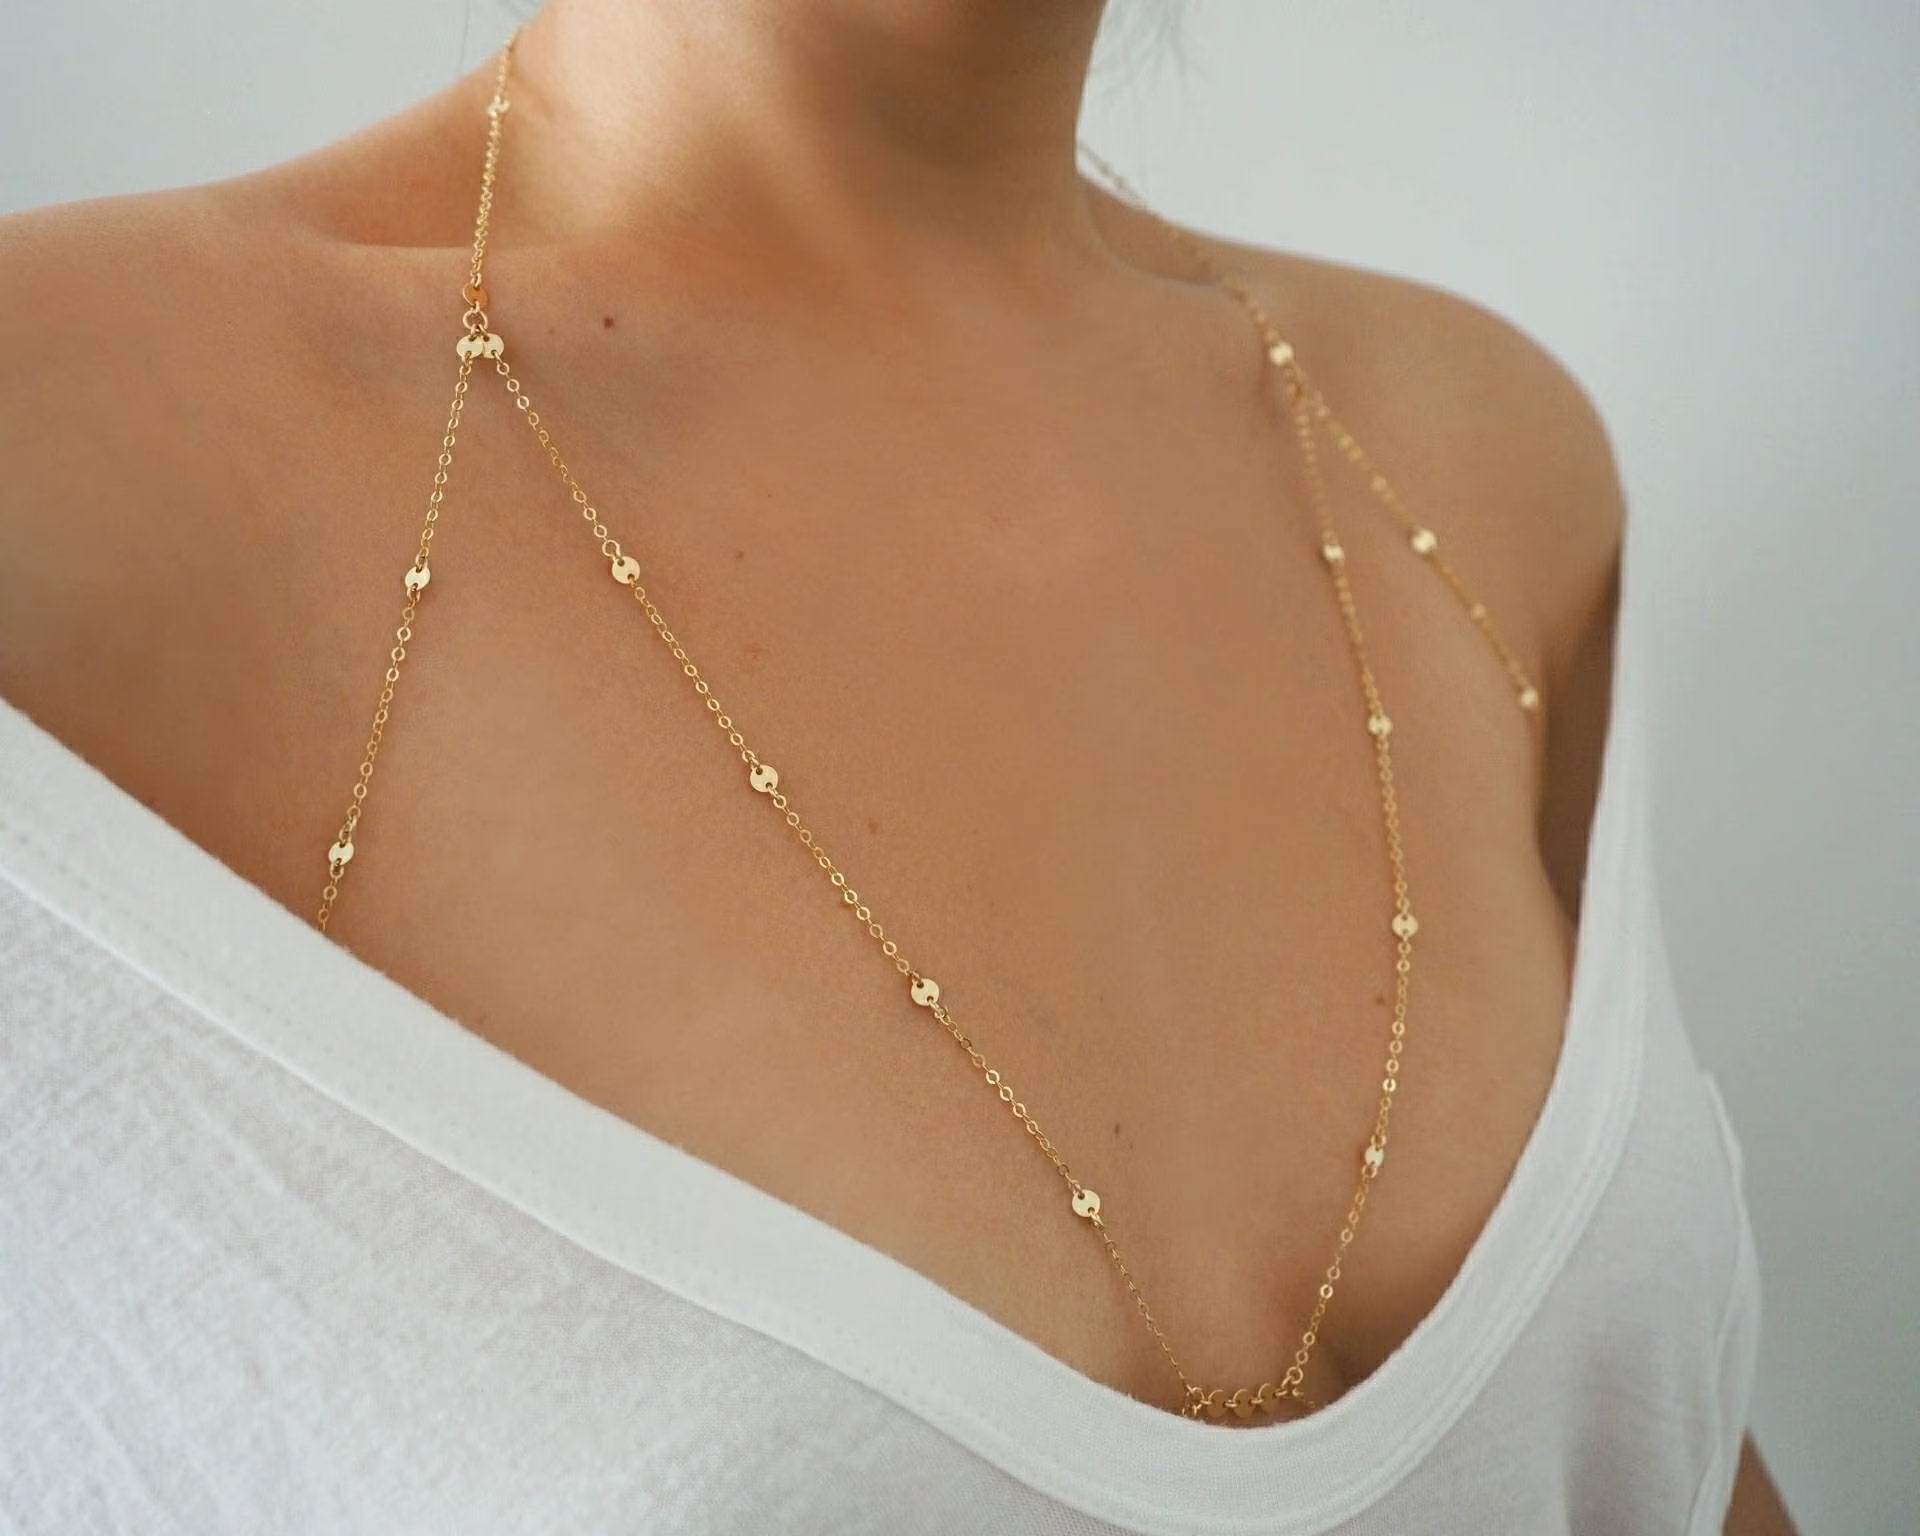 Stainless Steel or Gold Filled Double Layer Chain Bra Body Chain in Gold or  Silver, Handmade, Non-tarnish 